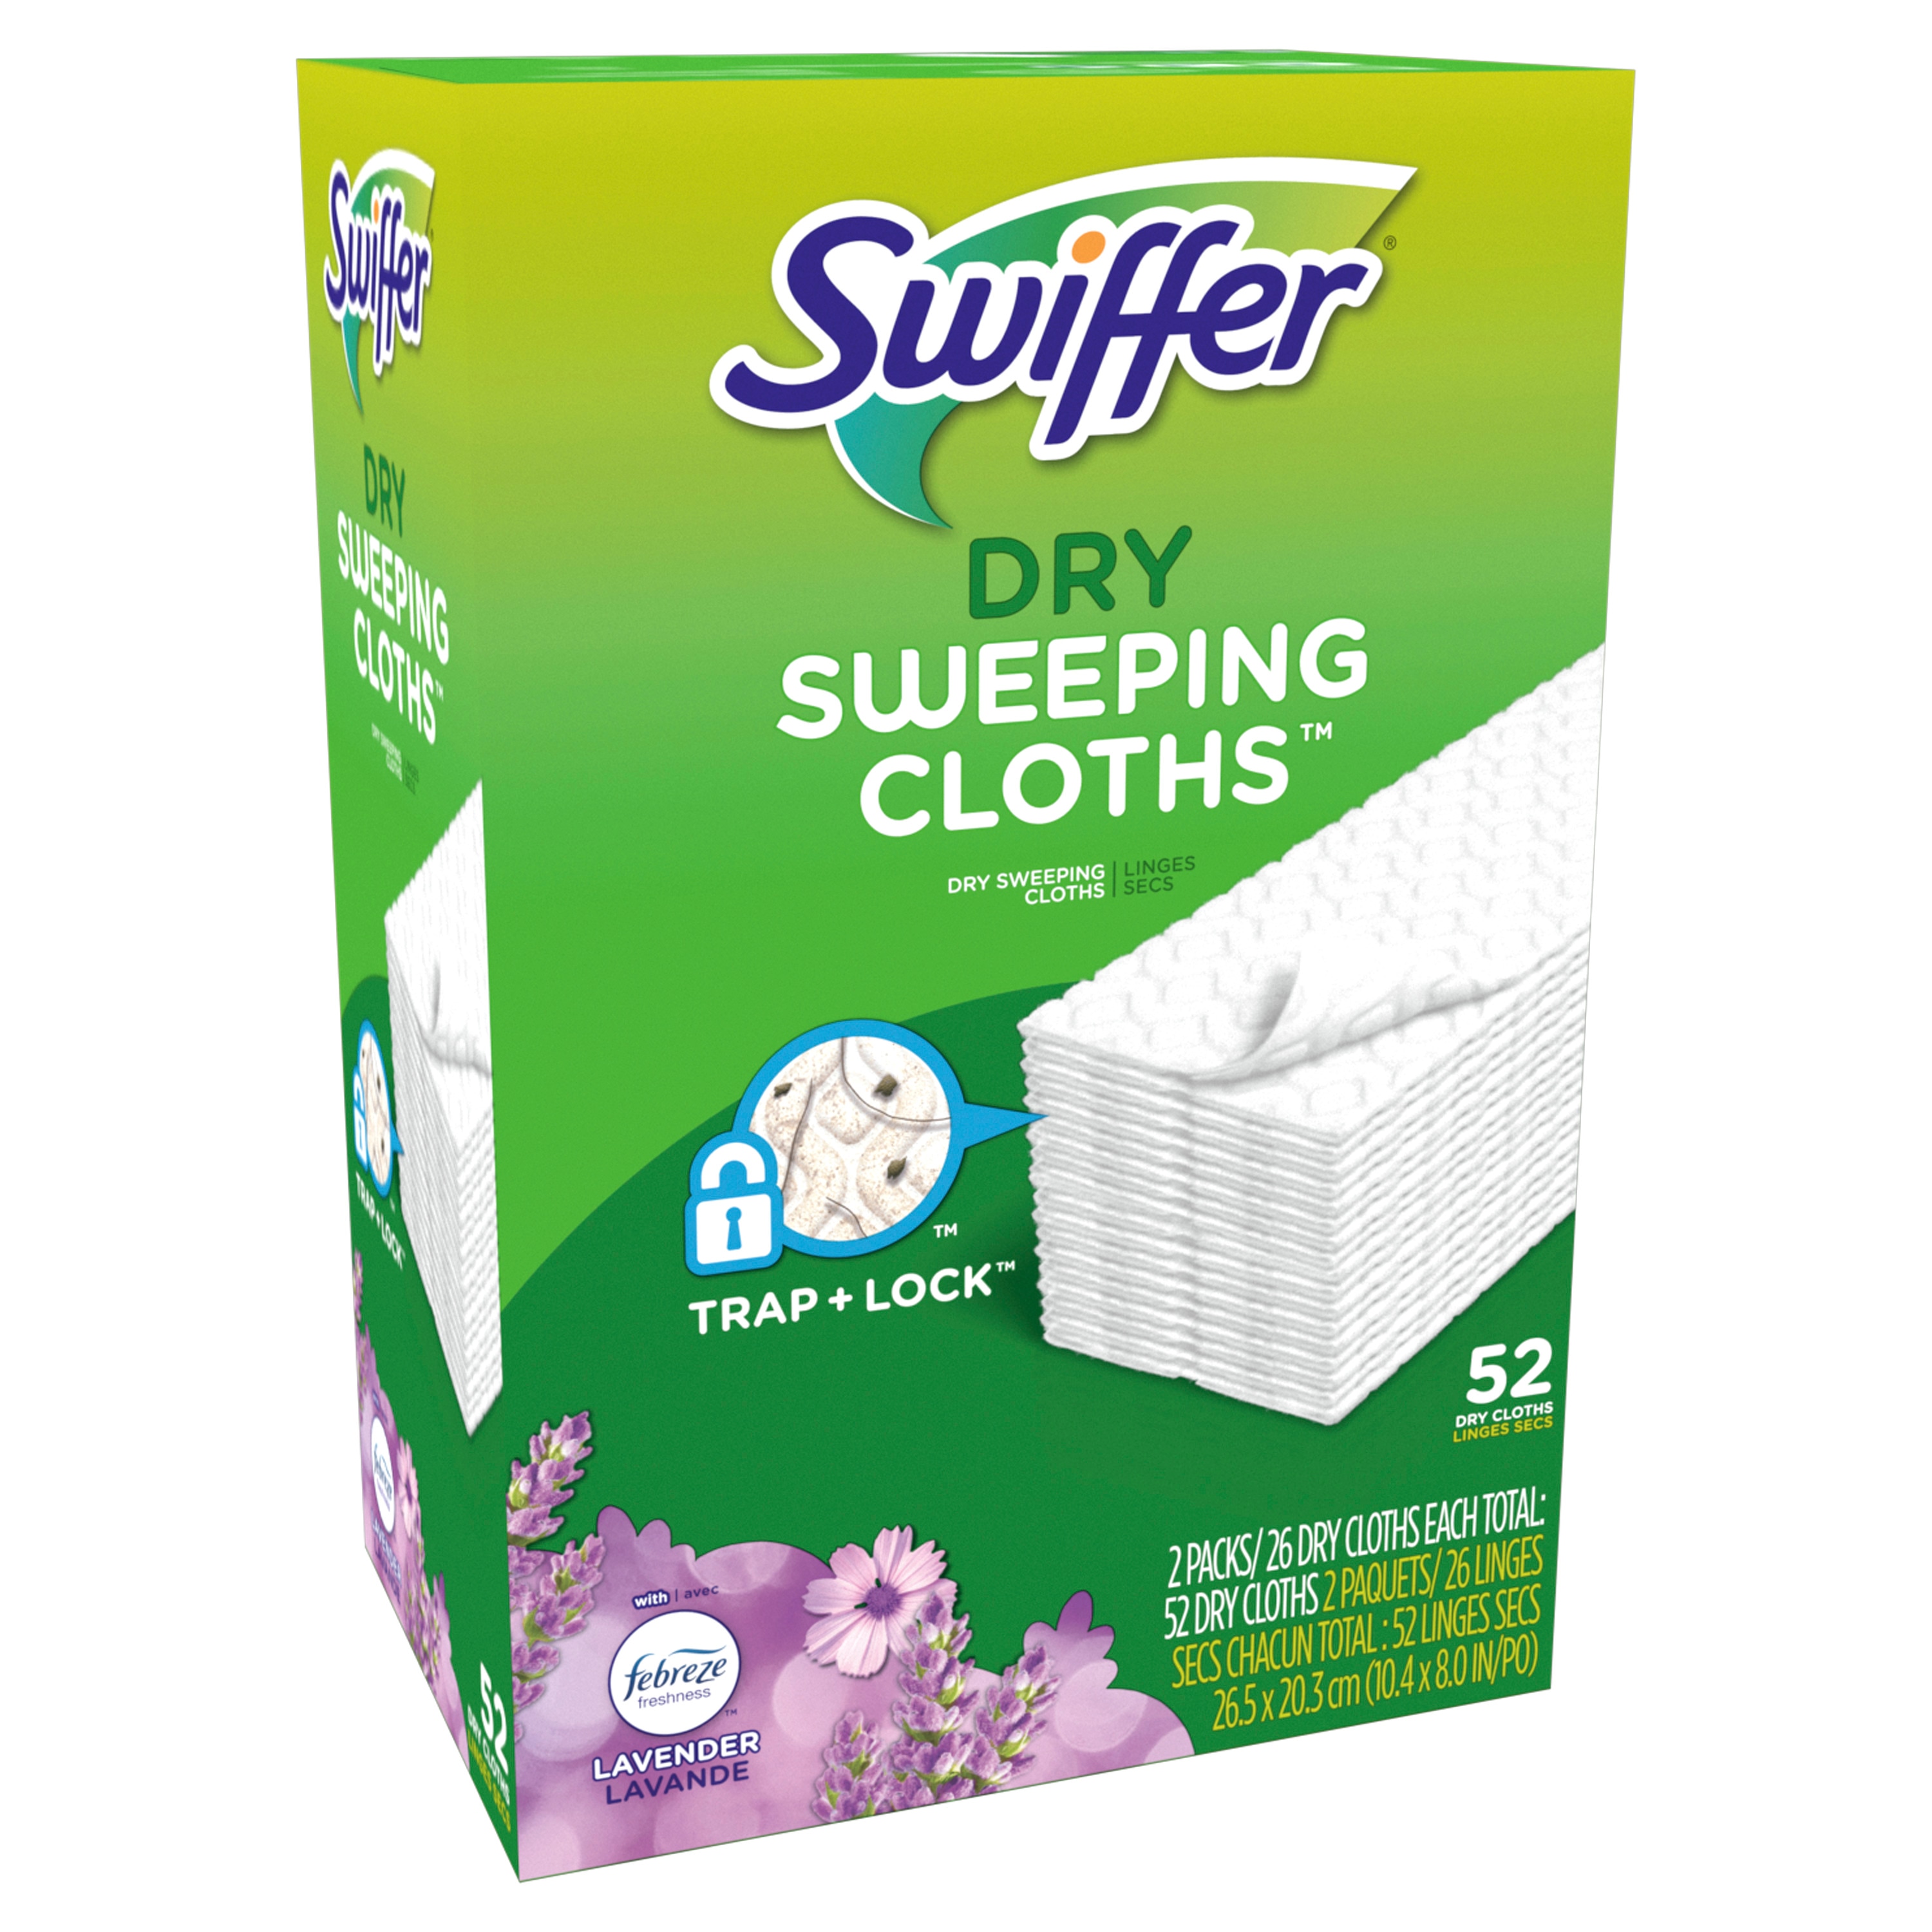 Swiffer Dust Catcher Mop 3D Cleaning Refills Dry Wipes for Floors 14